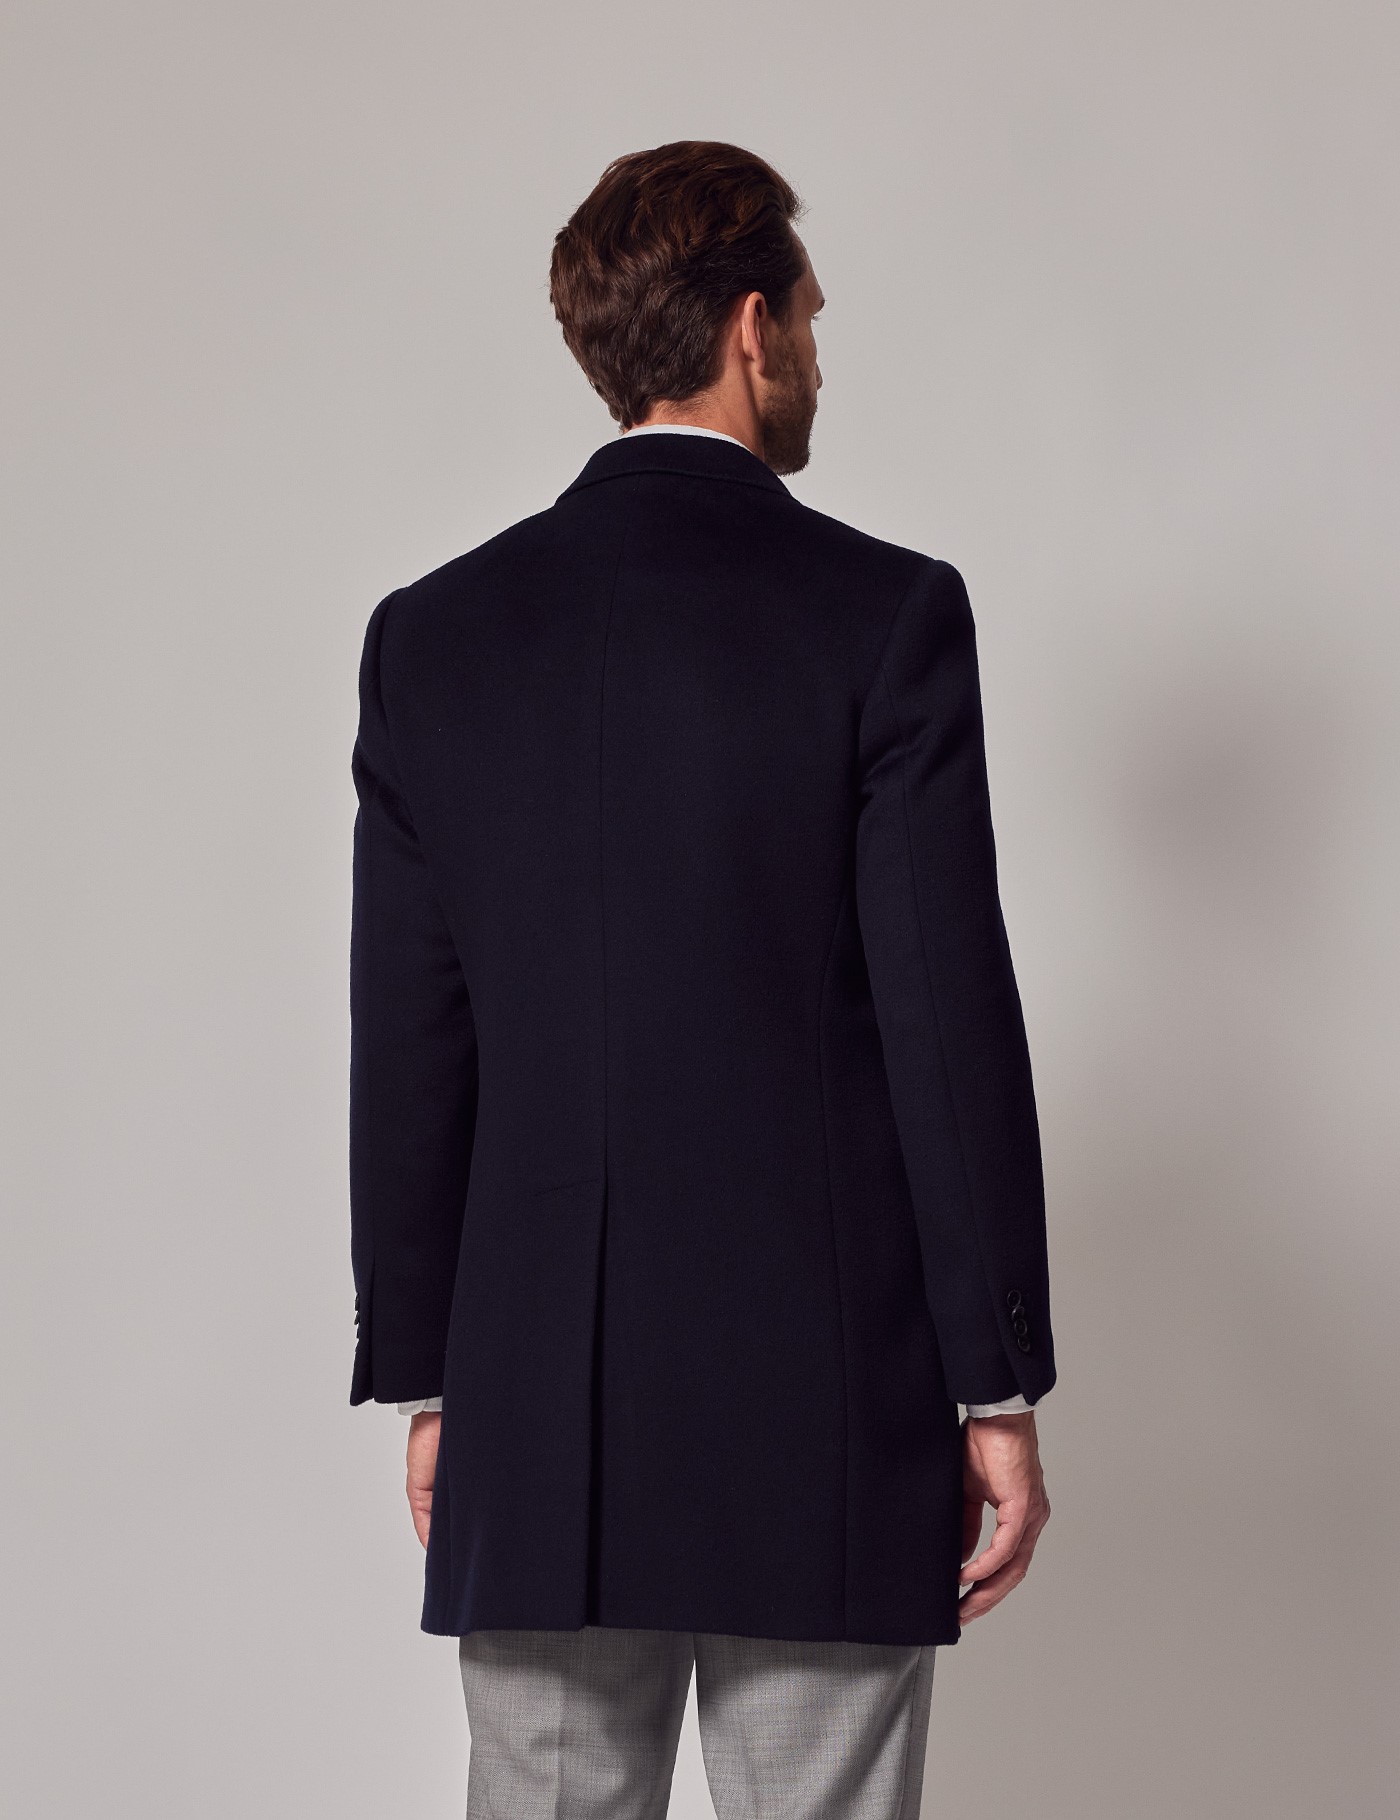 Men’s Navy Wool Overcoat with Back Vent | Hawes & Curtis